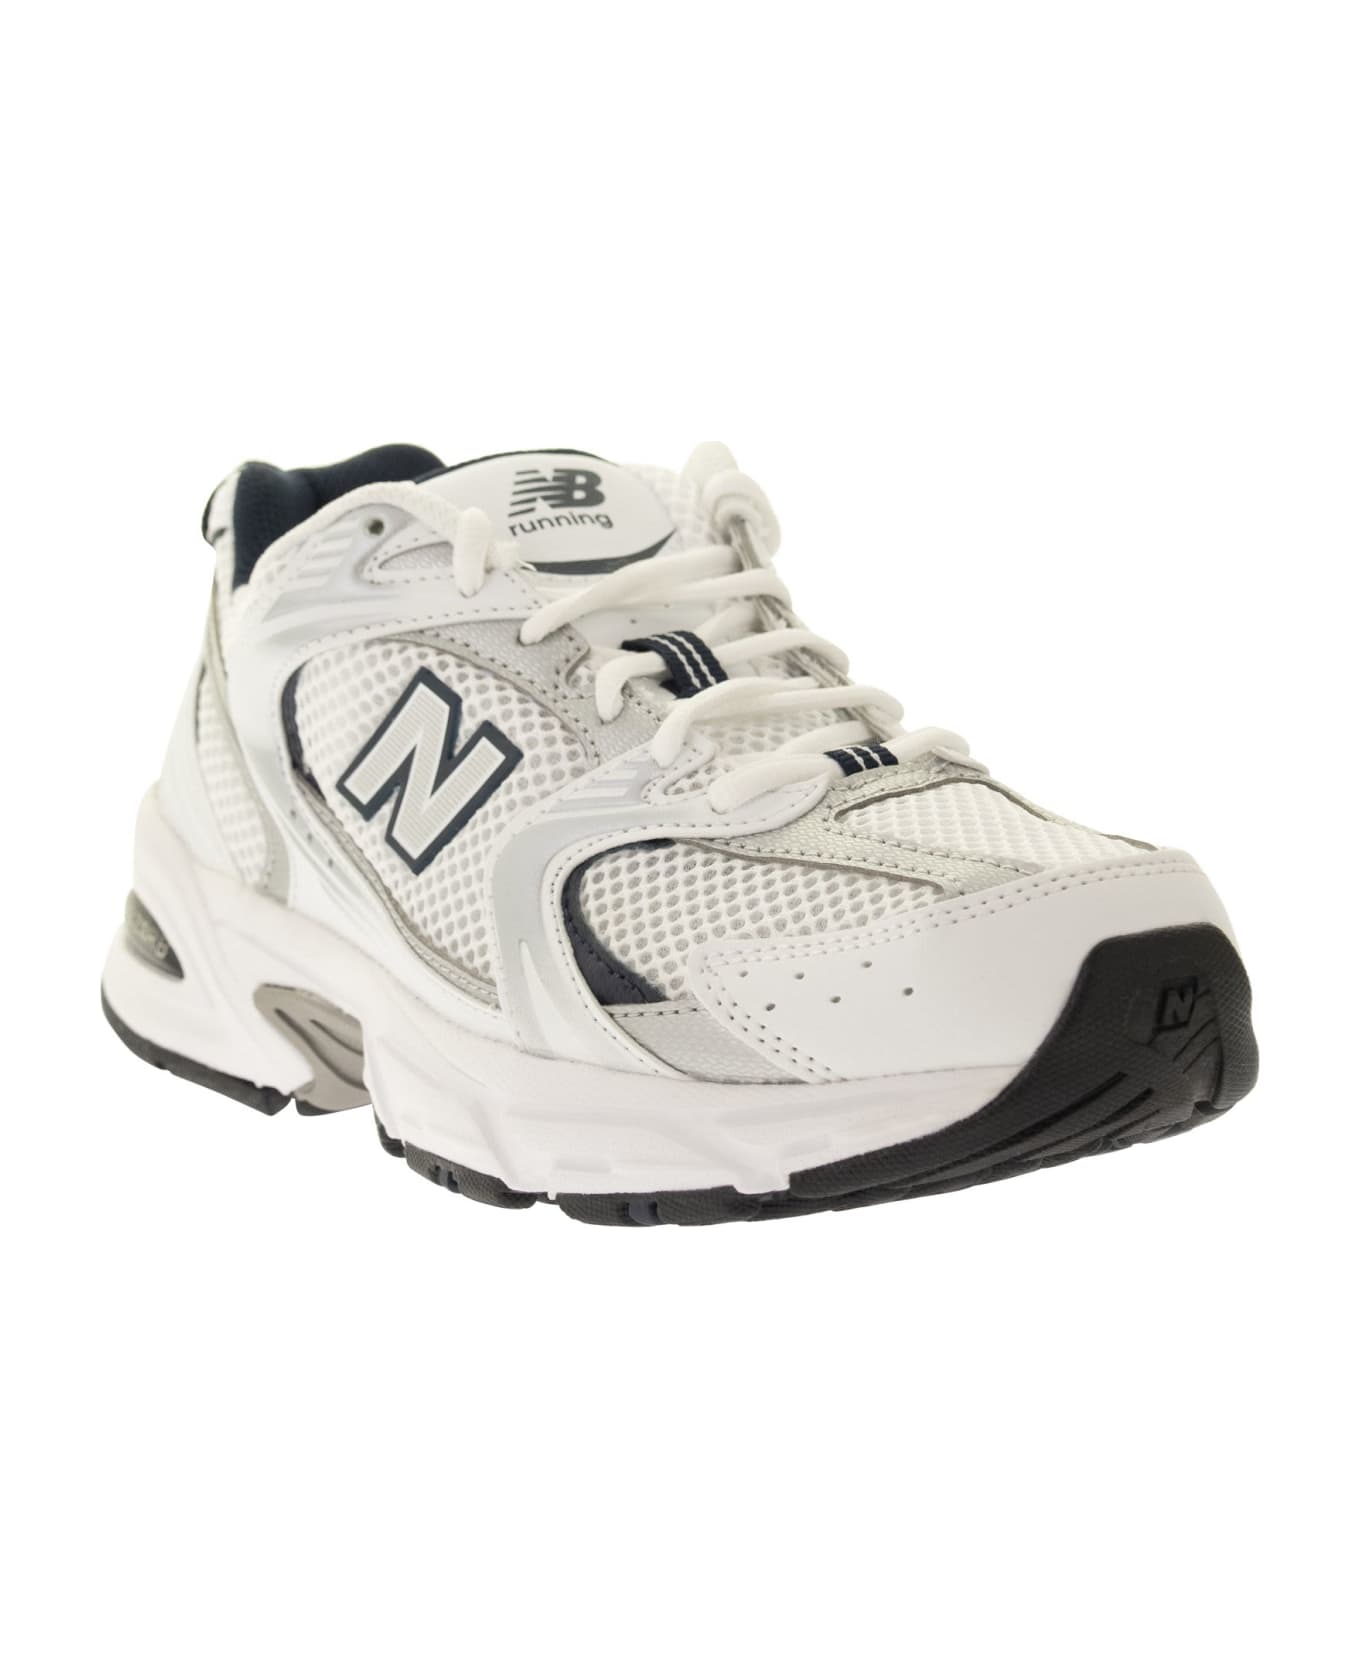 New Balance 530 - Sneakers Lifestyle - White スニーカー